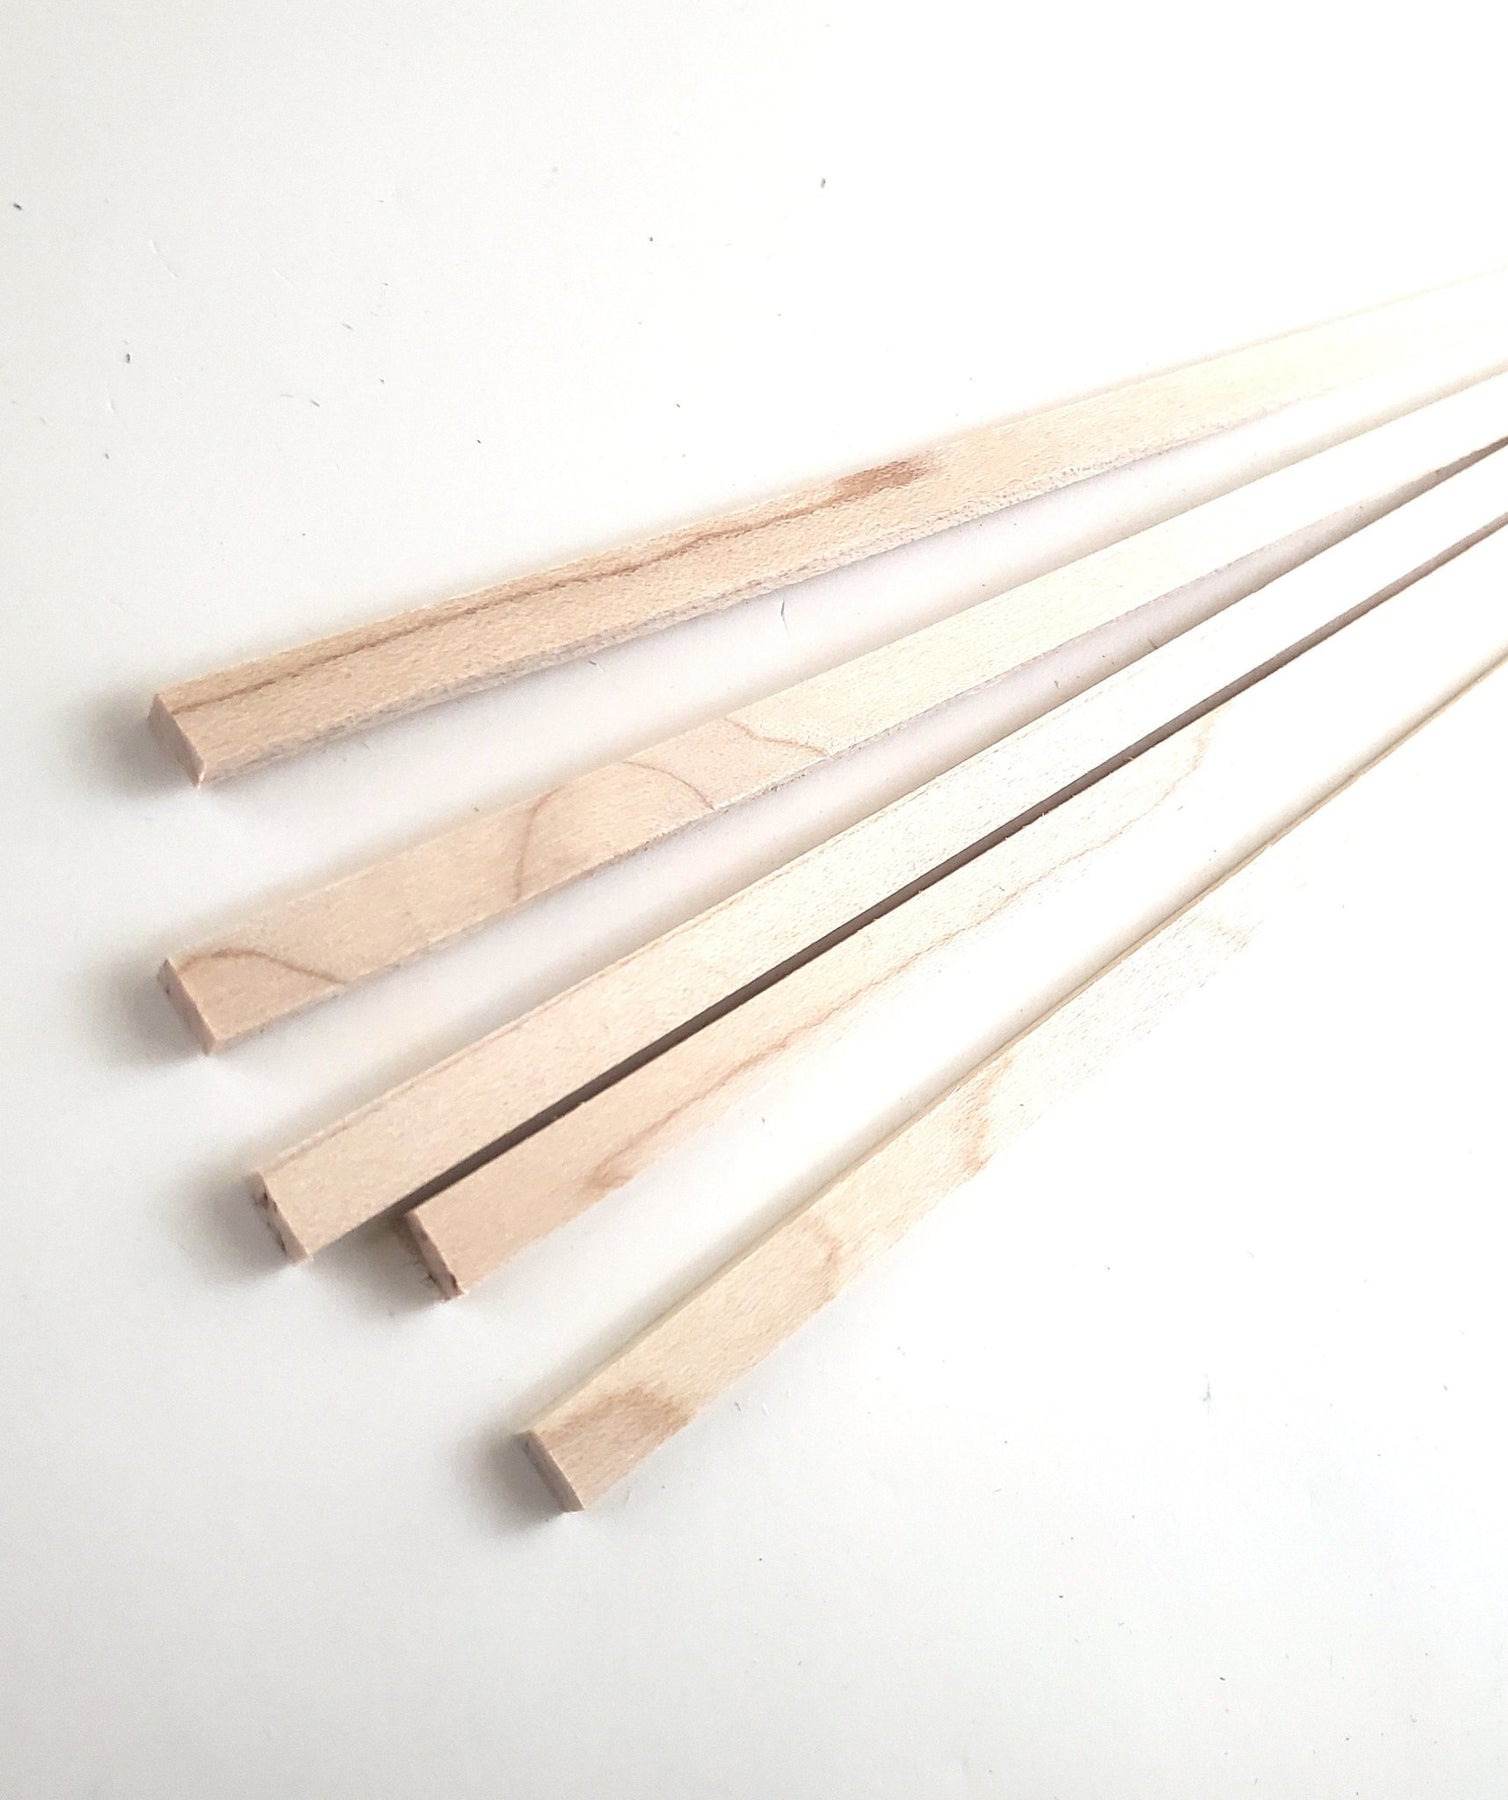 Maple Wood Strips 10 Pieces 1/16 X 1/4 X 6 Long Crafts Models Miniatures 